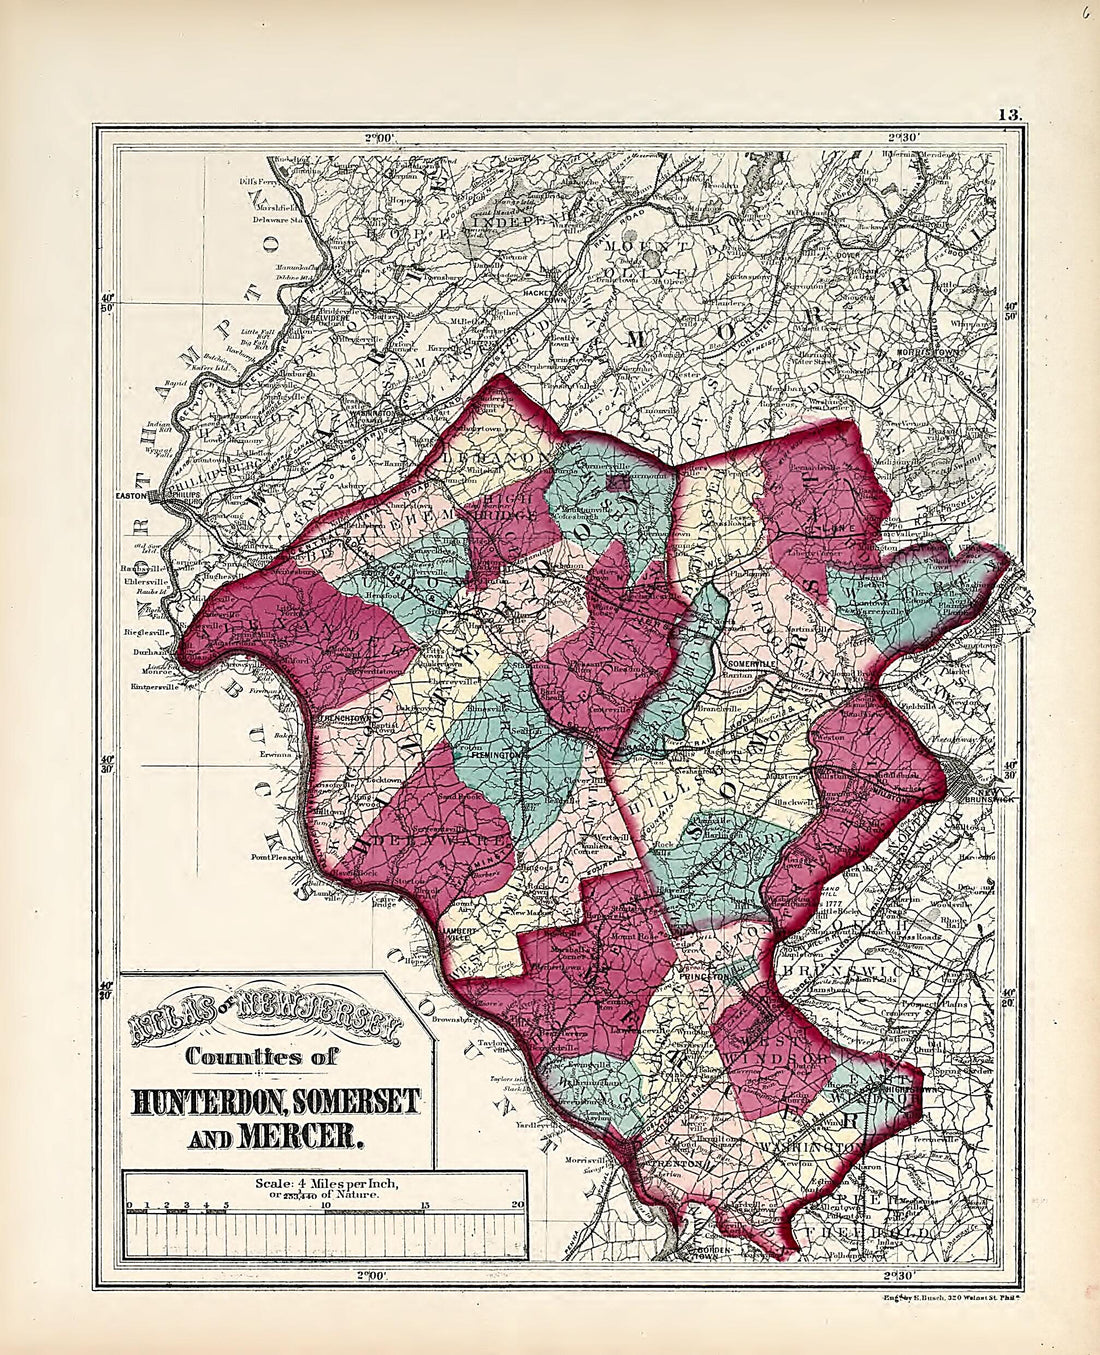 This old map of Counties of Hunterdon, Somerset and Mercer from Atlas of the Late Township of Greenville, and the State of New Jersey from 1873 was created by Griffith Morgan Hopkins in 1873